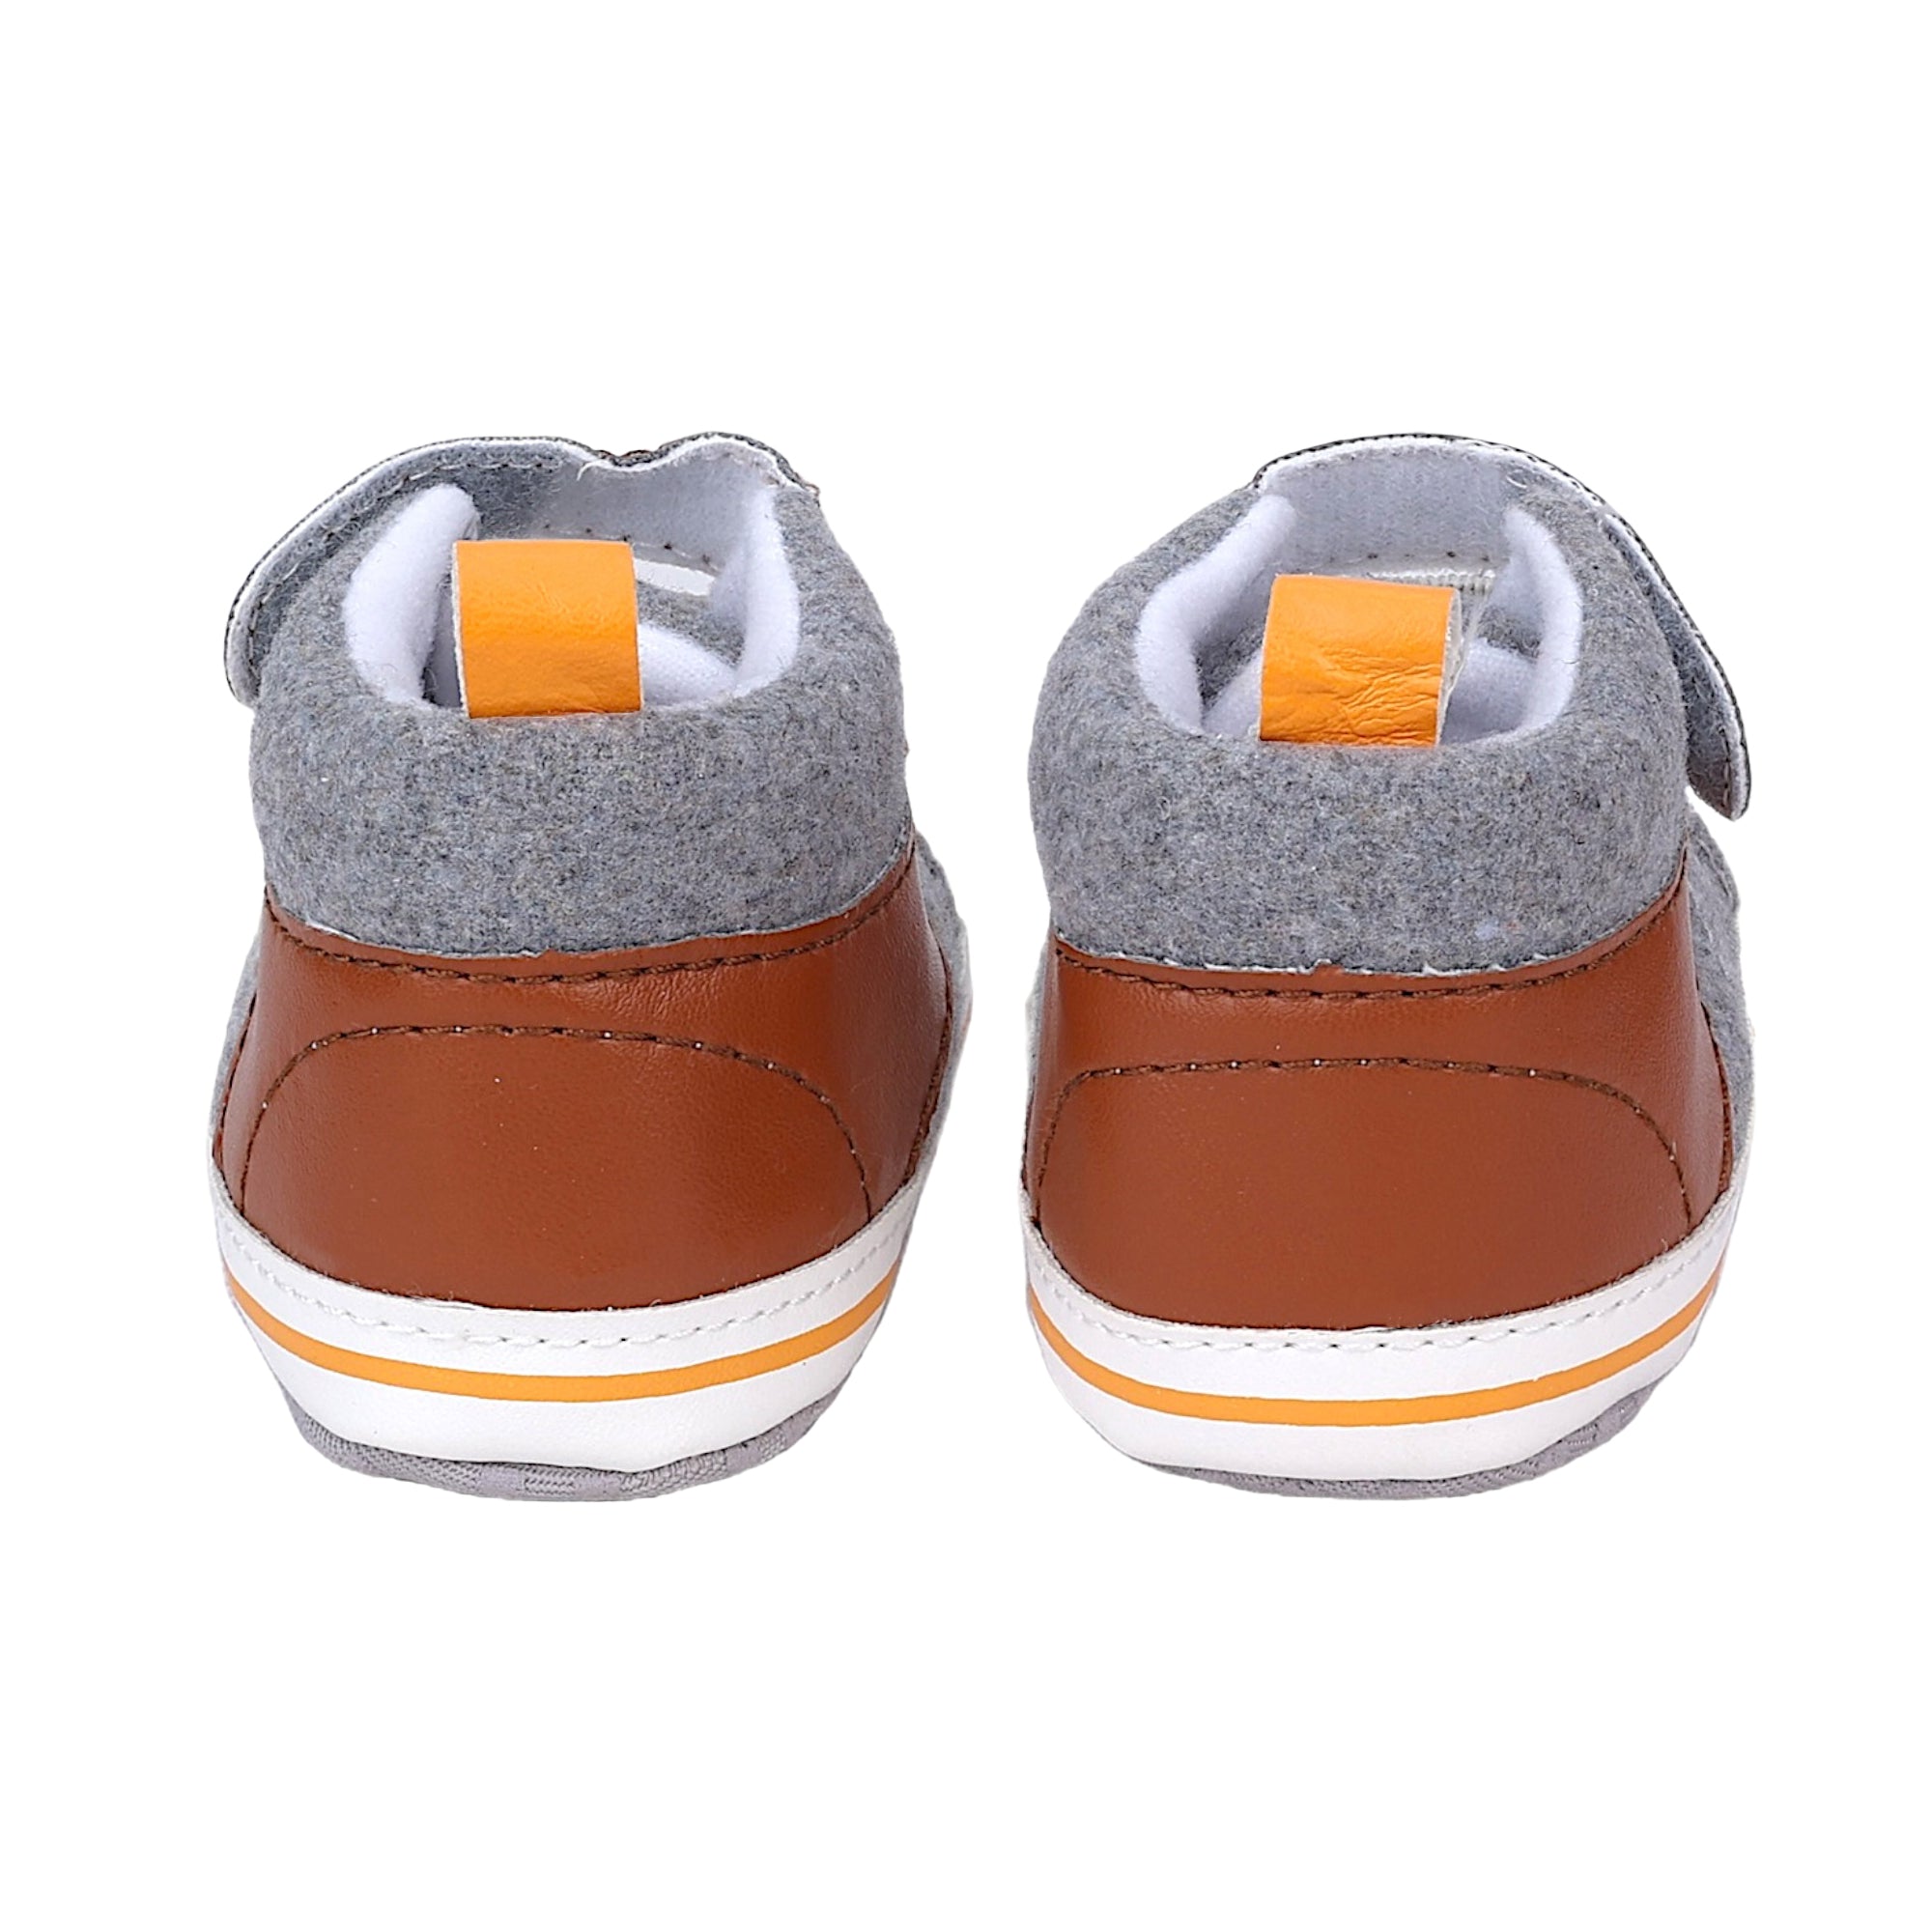 Baby Moo Leather Lace-Up Design Velcro Strap Anti-Skid Sneakers - Grey, Brown